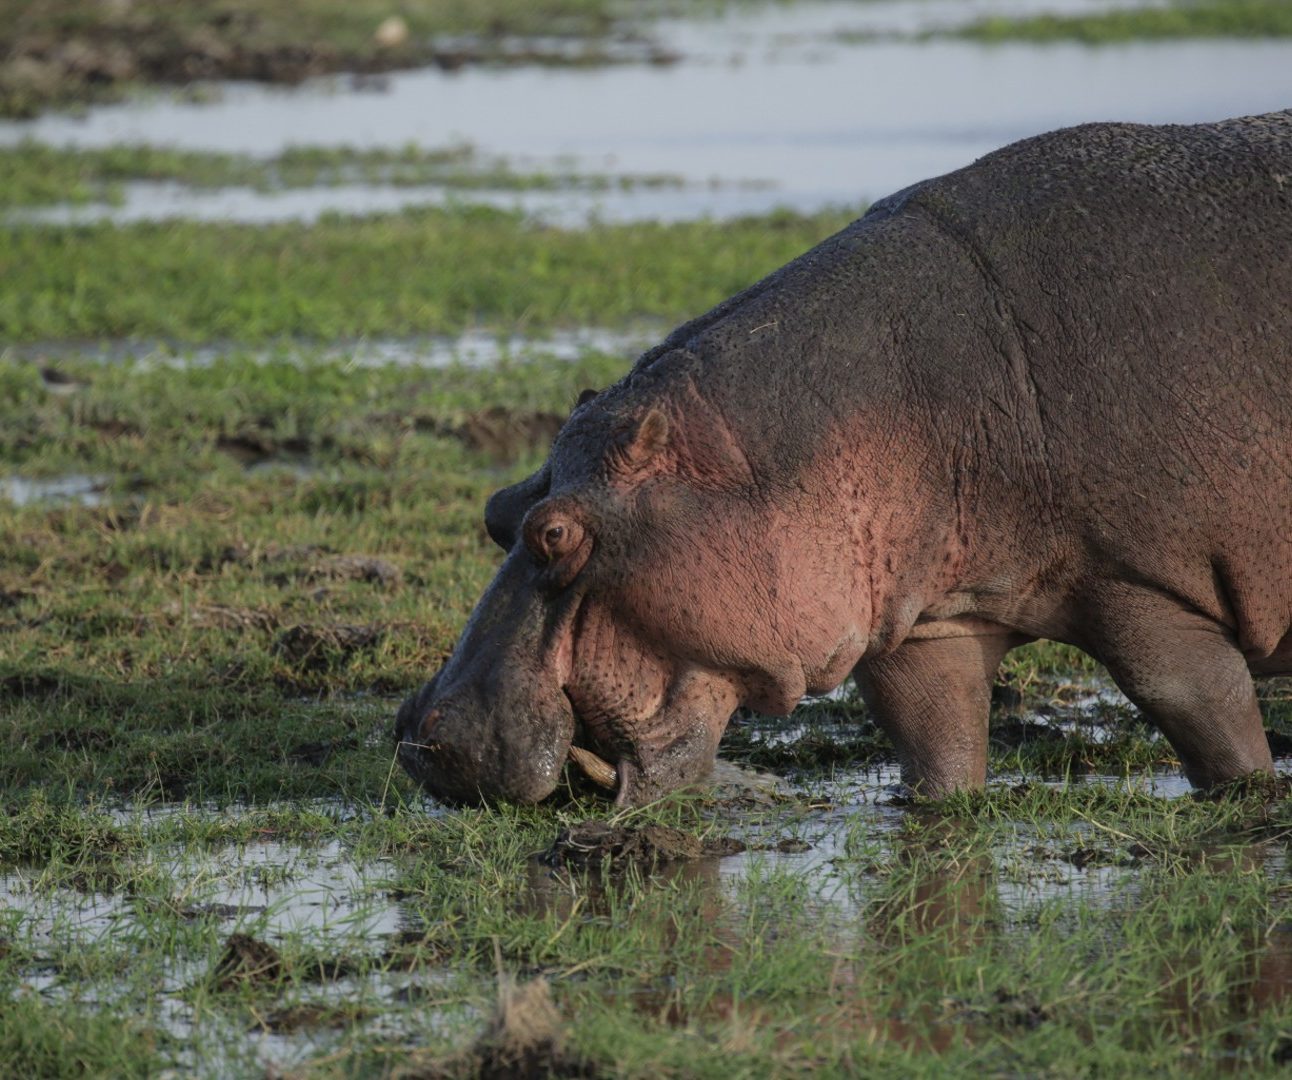 A hippo grazing in a marshy area of grass